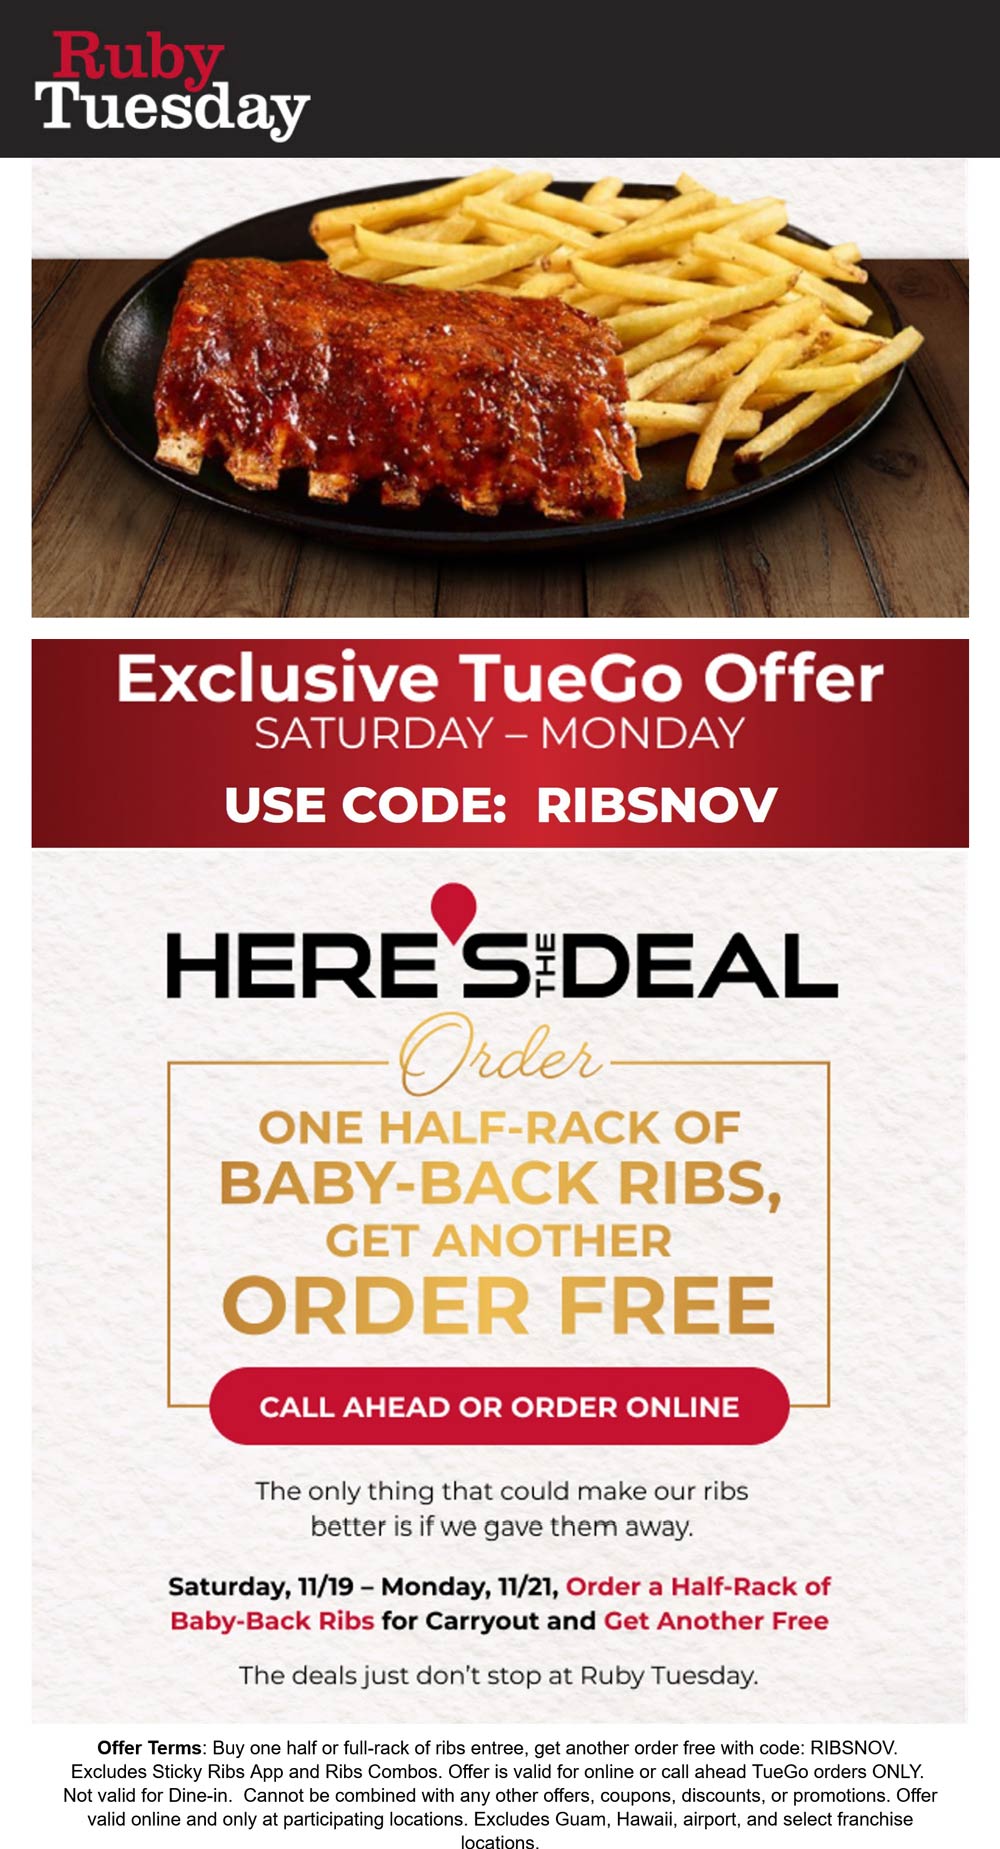 Ruby Tuesday restaurants Coupon  Second ribs entree free at Ruby Tuesday via promo code RIBSNOV #rubytuesday 